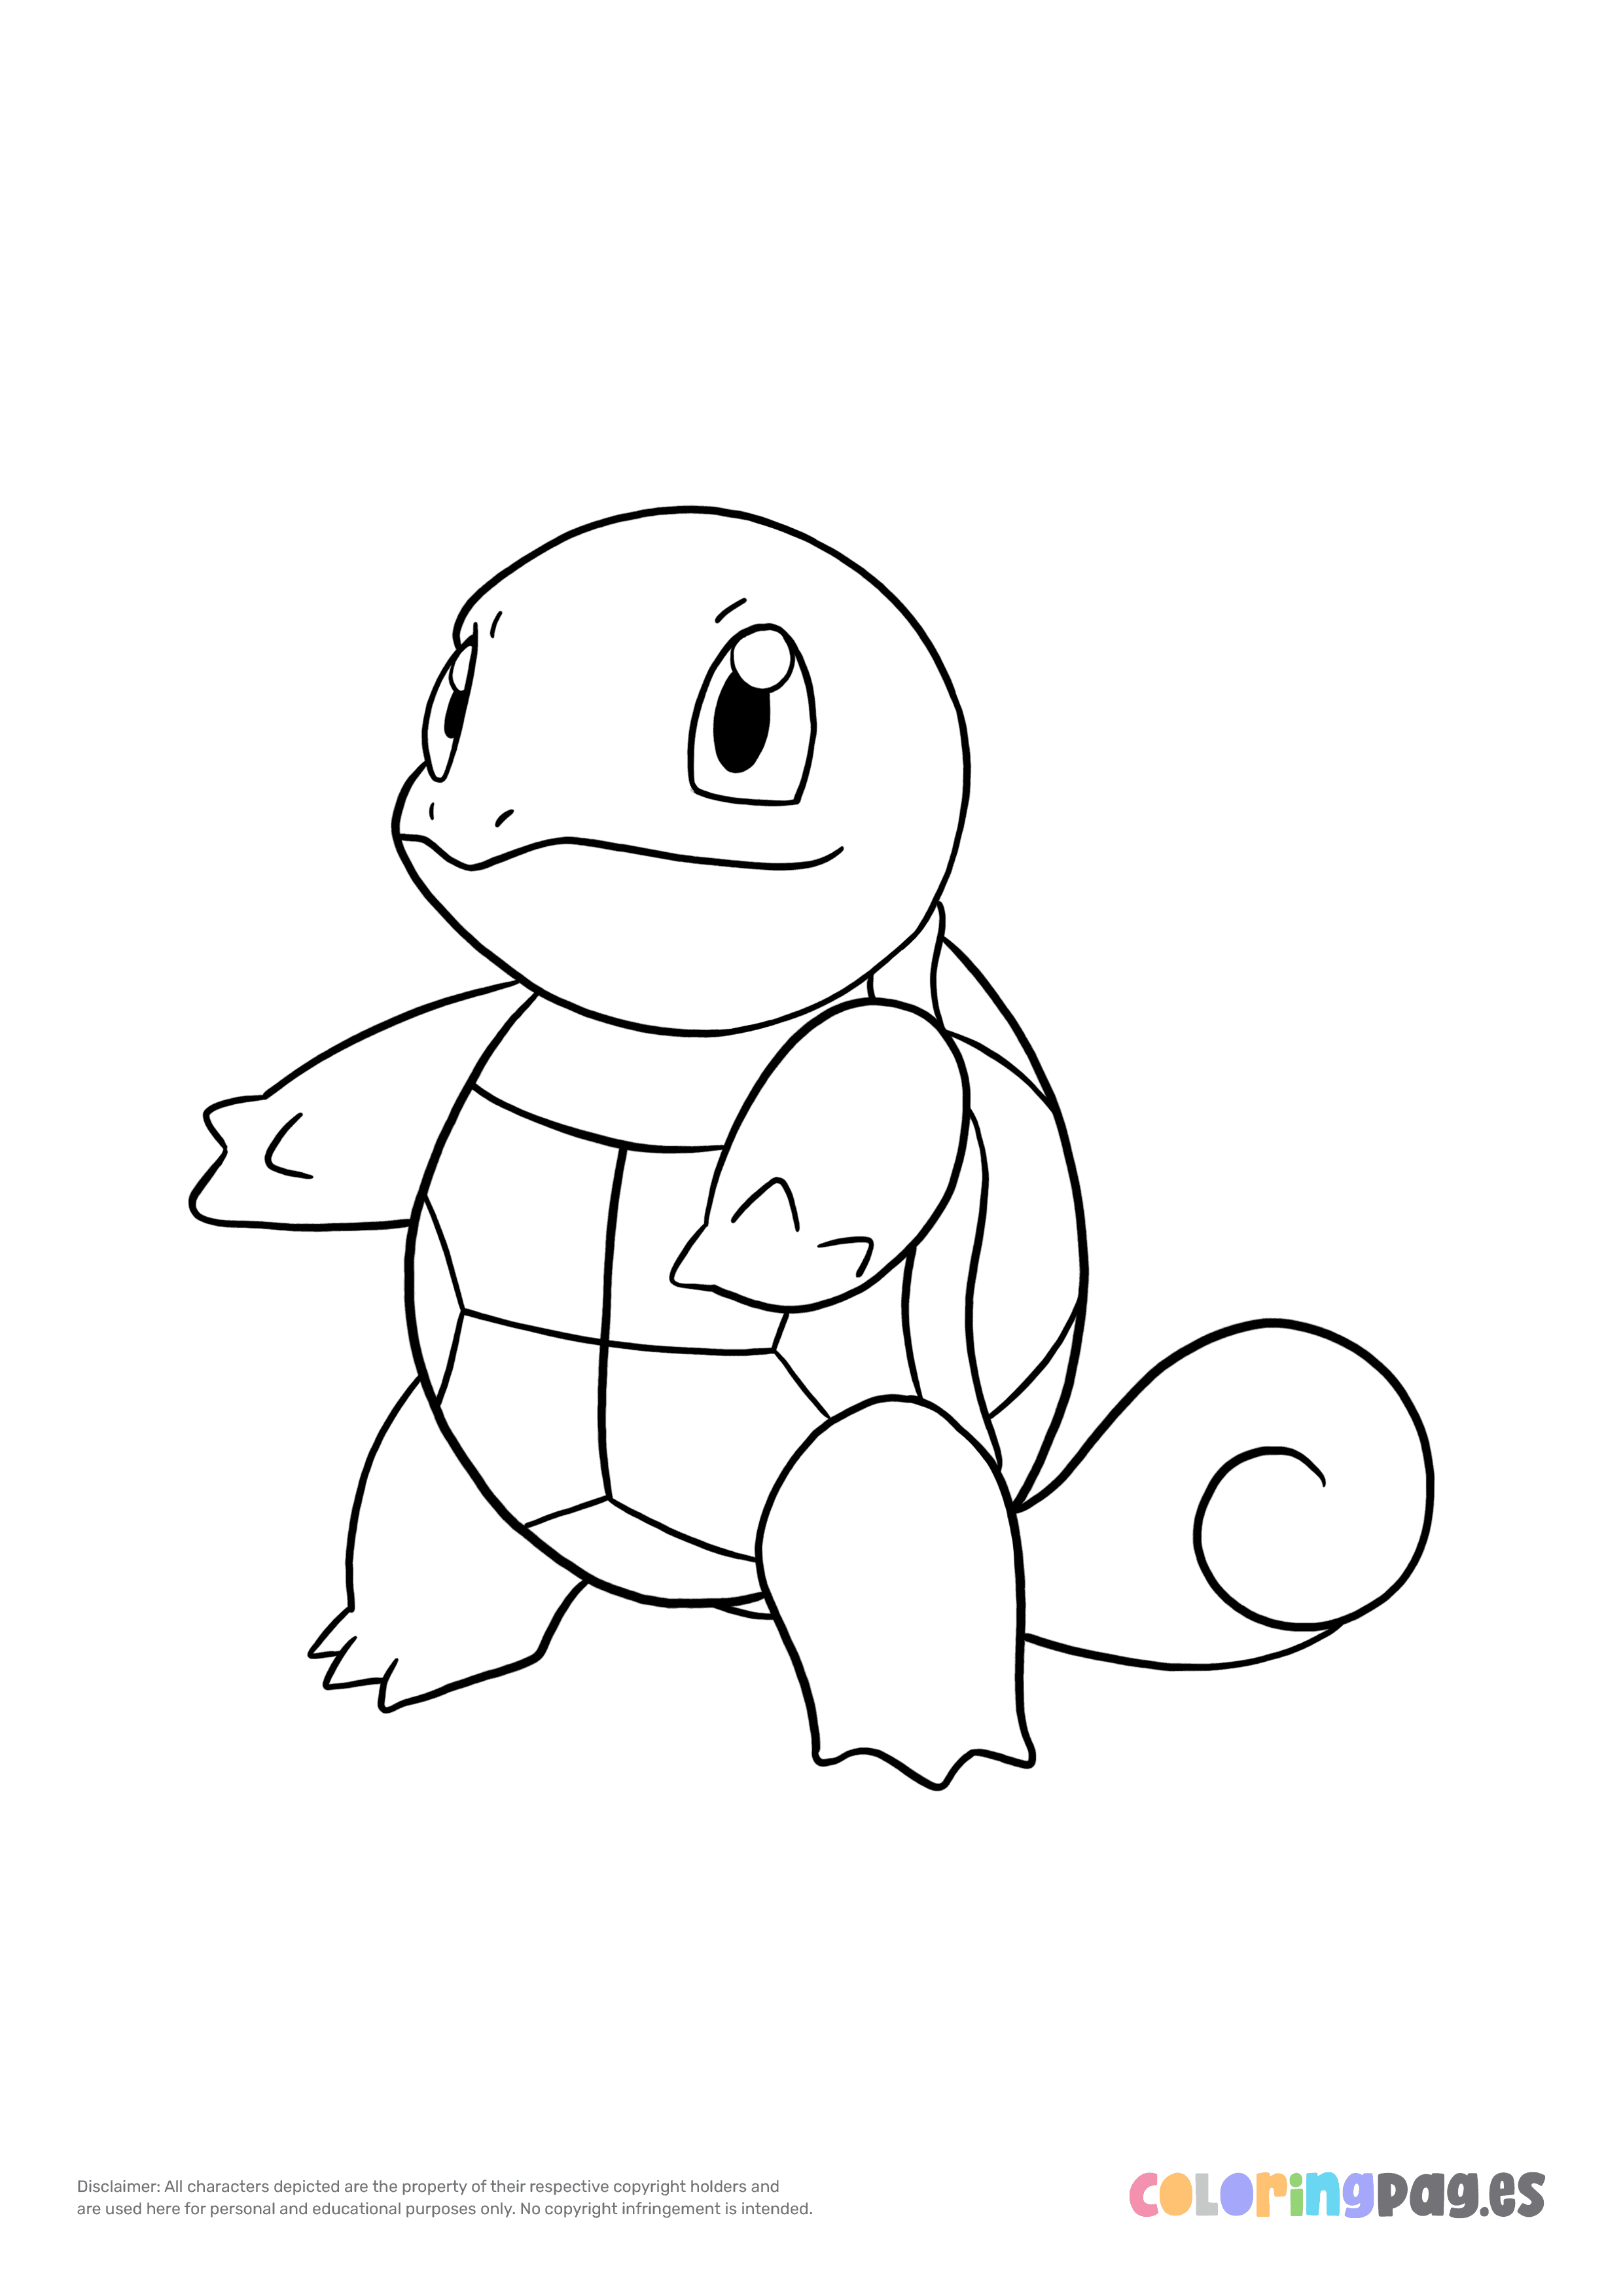 Pokémon Squirtle coloring page